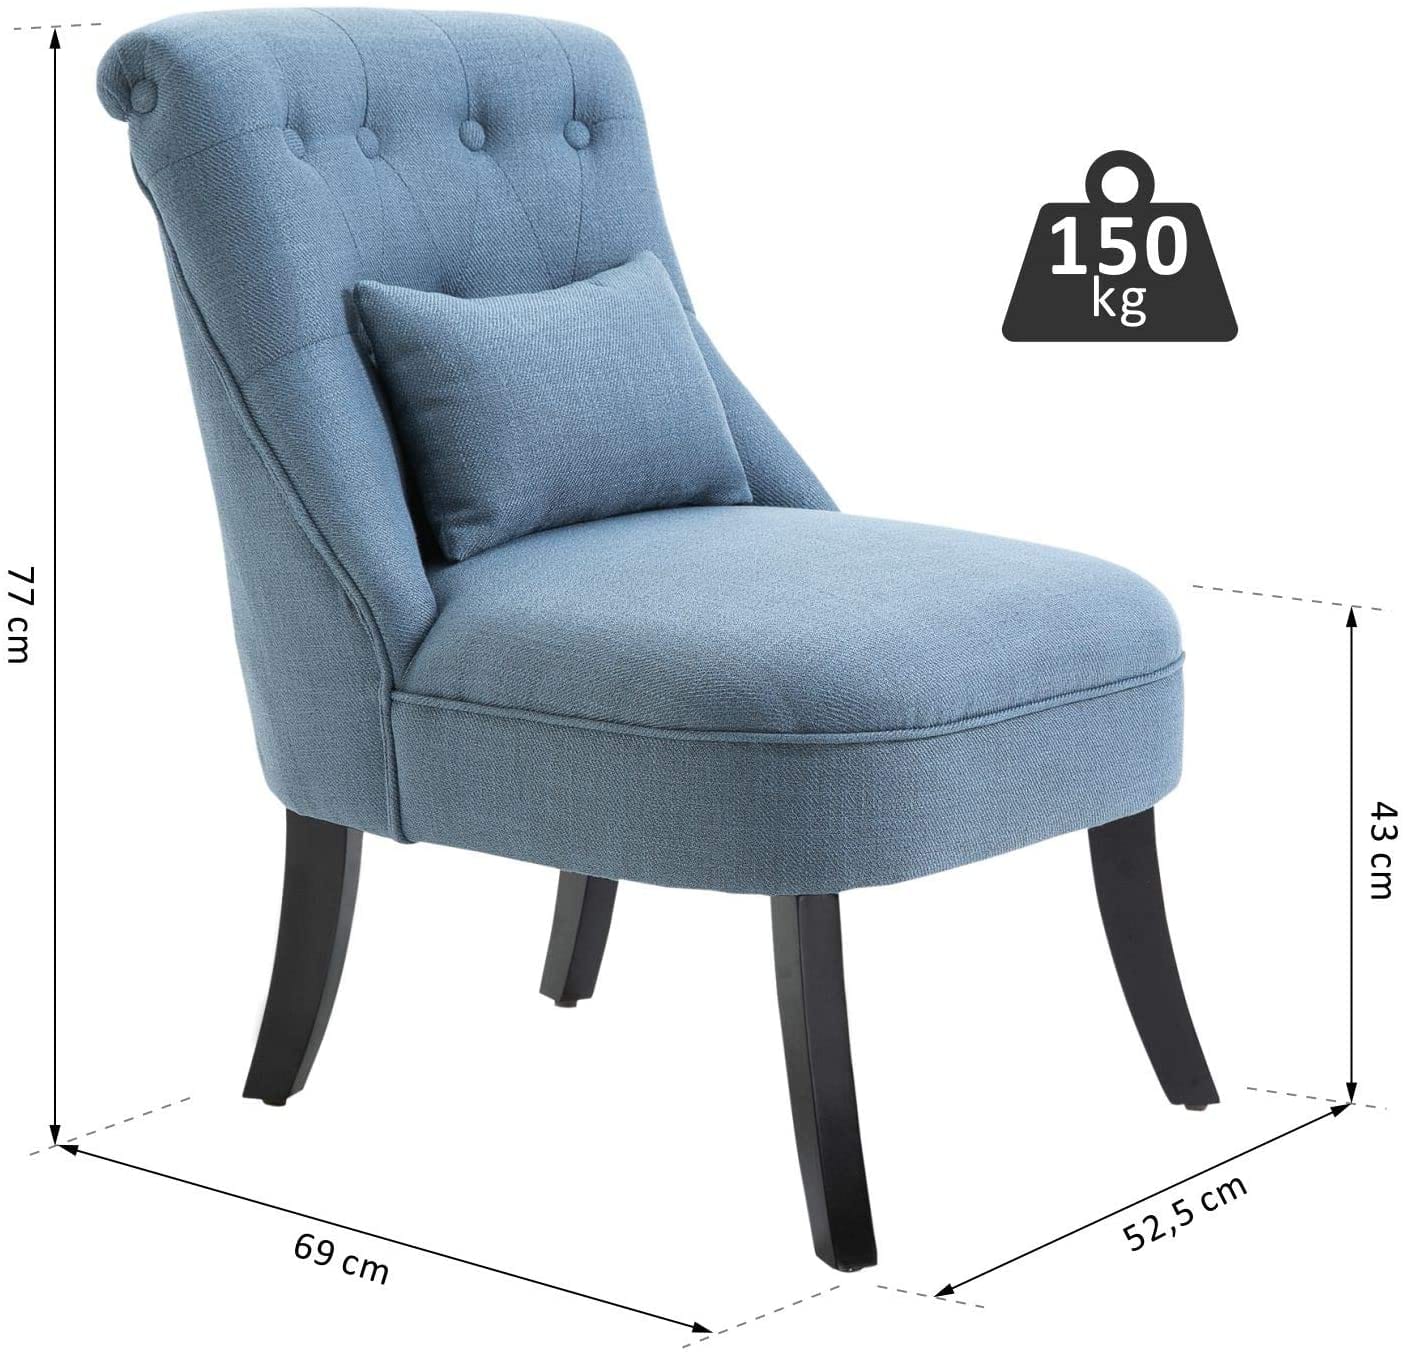 Fabric Single Sofa Dining Chair Tub Chair Upholstered W/Pillow Solid Wood Leg Home Living Room Furniture Blue